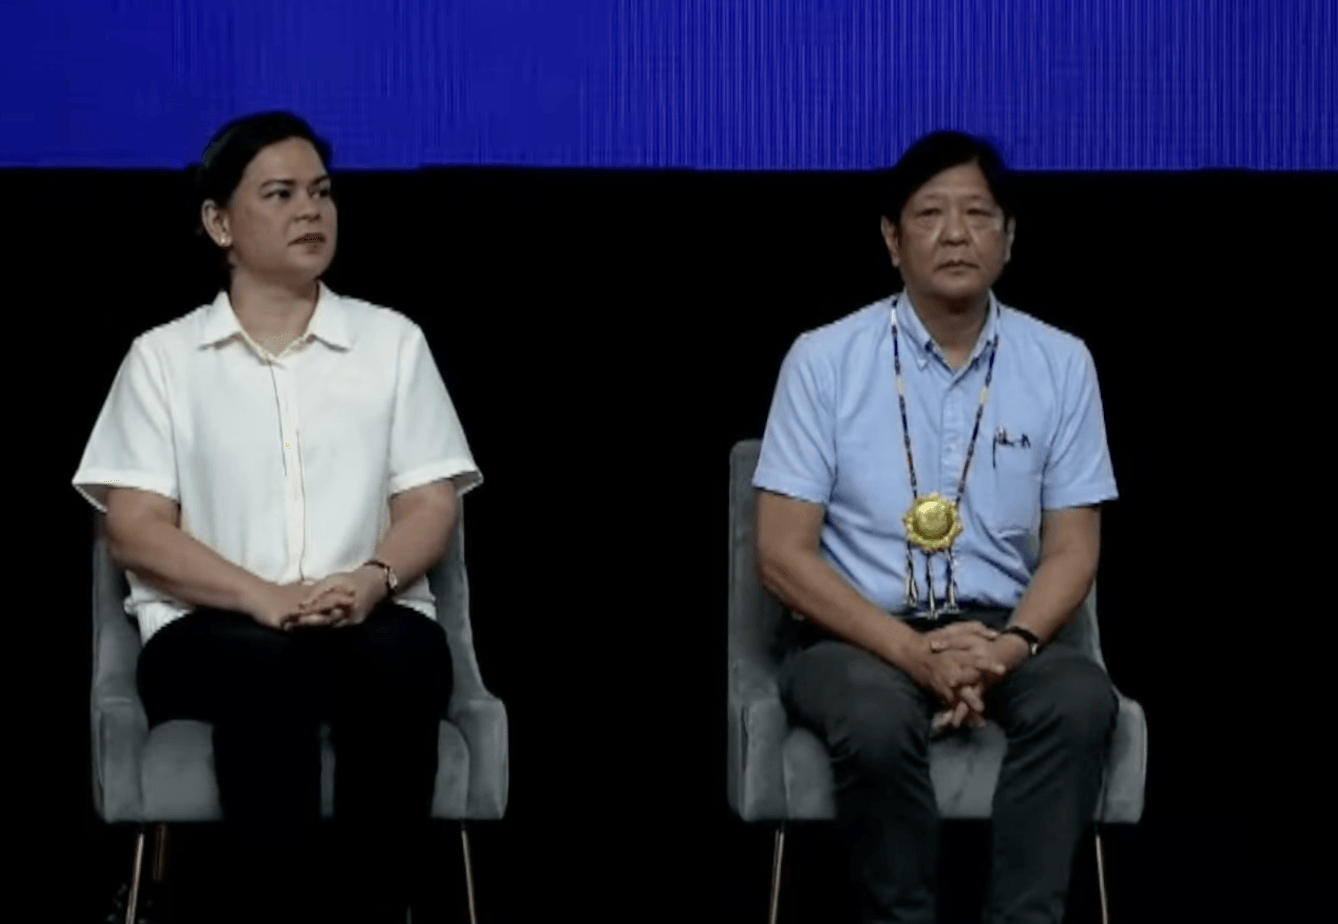 The Dutertes, except VP Sara, absent during Marcos’ public events in Davao City